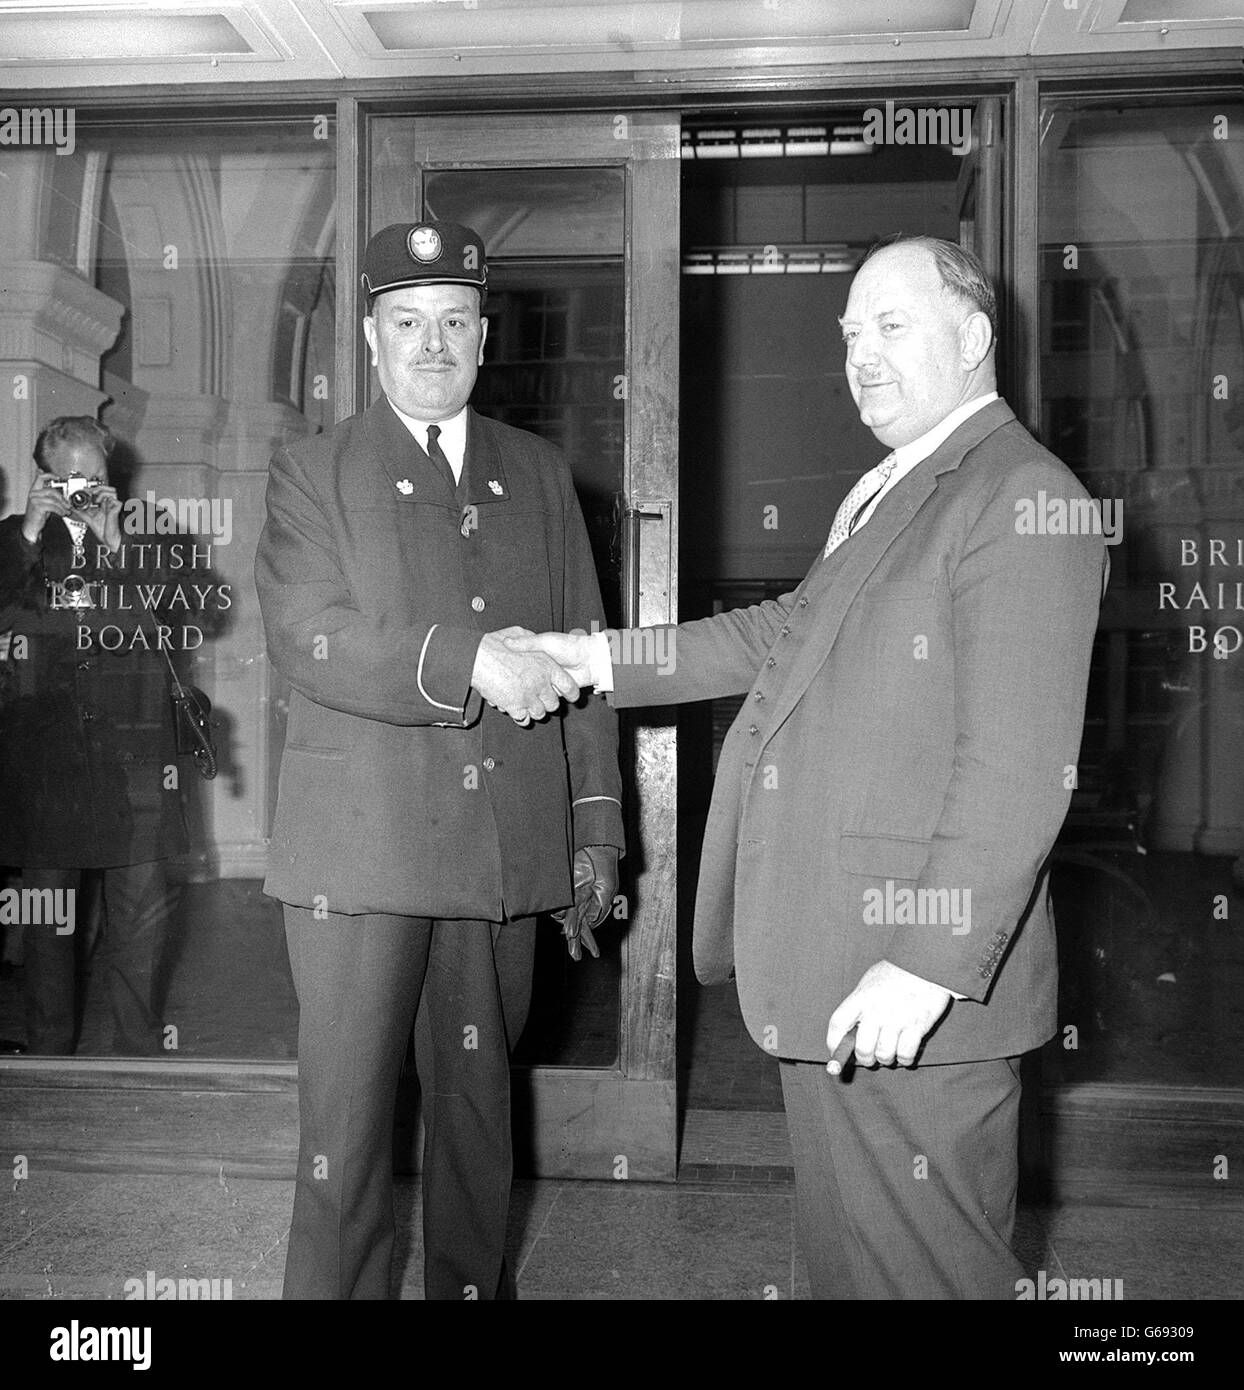 Dr Beeching (right) pictured on the day he left his post of Chairman of the British Transport Commission. He is shaking hands with British Railways commissionaire Mr John Lay, who is wearing a new style uniform. Stock Photo